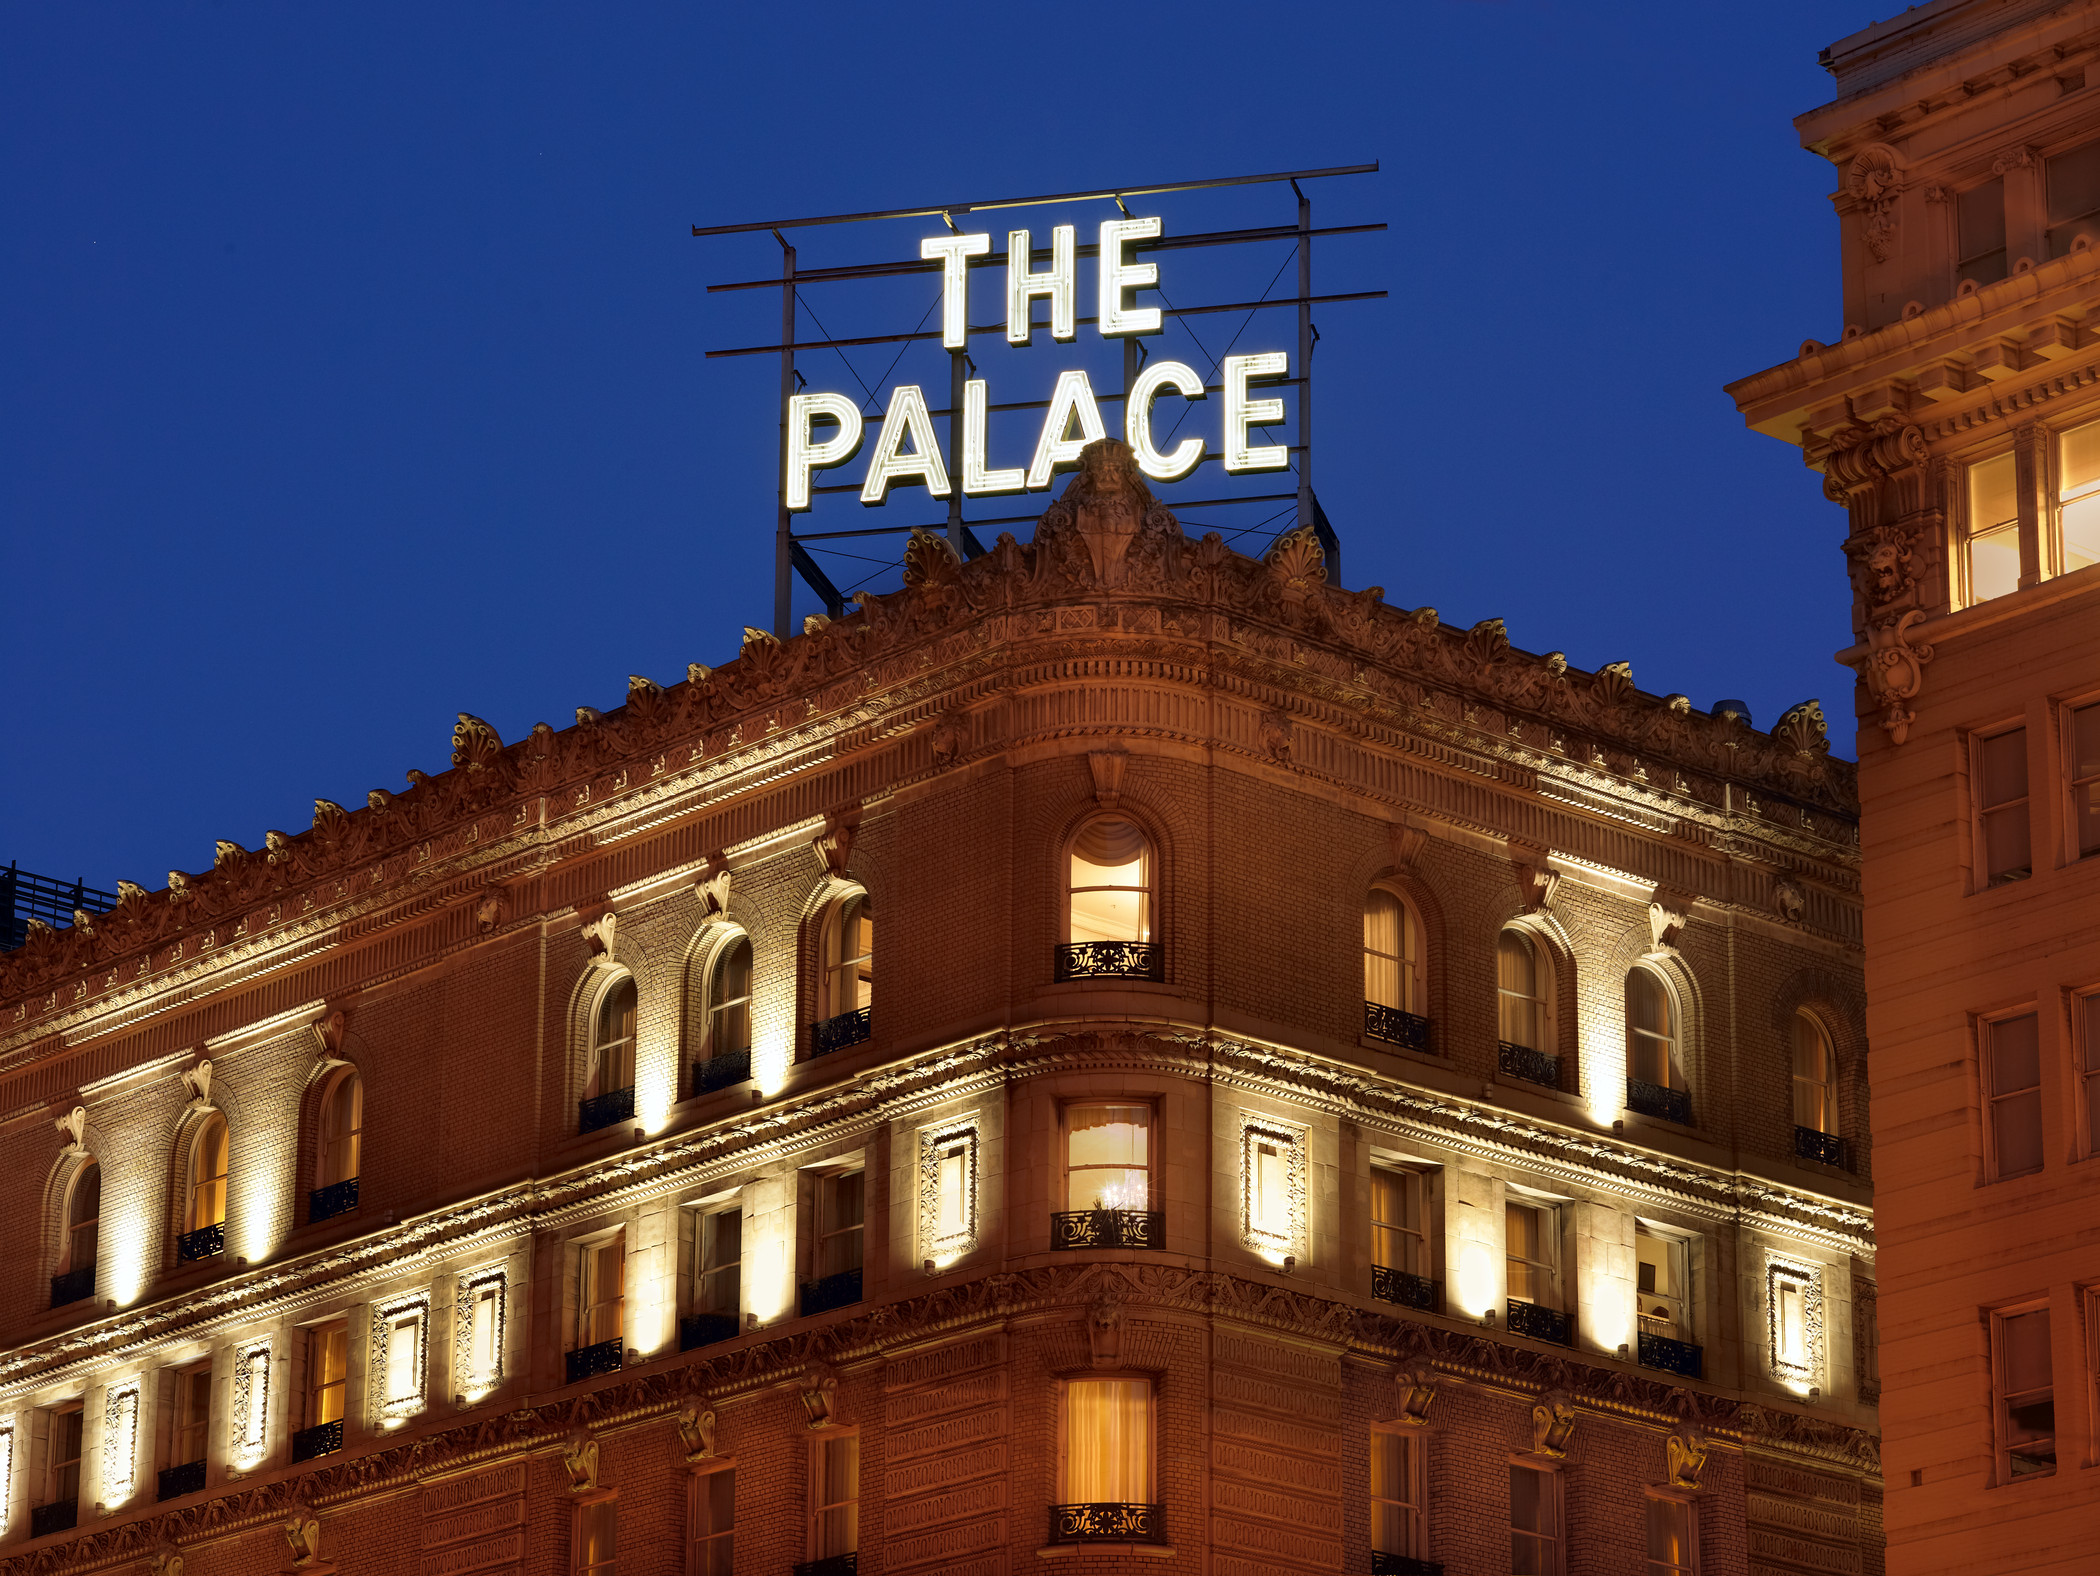 The Winner Of Two Free Nights At The Palace Hotel Is…